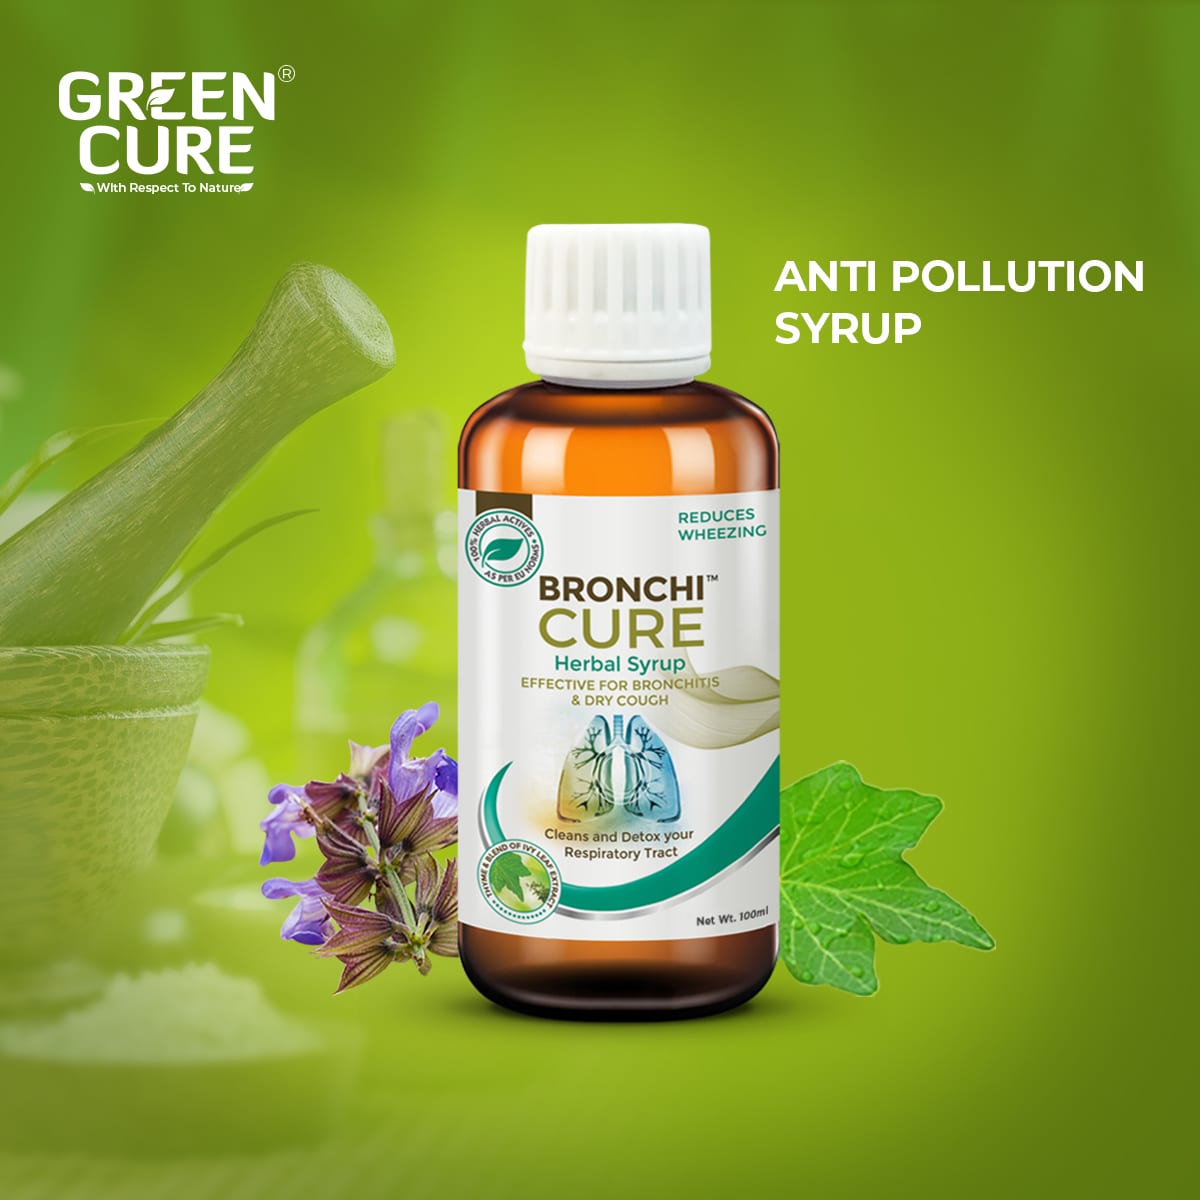 Bronchicure - THE ANTI POLLUTION SYRUP